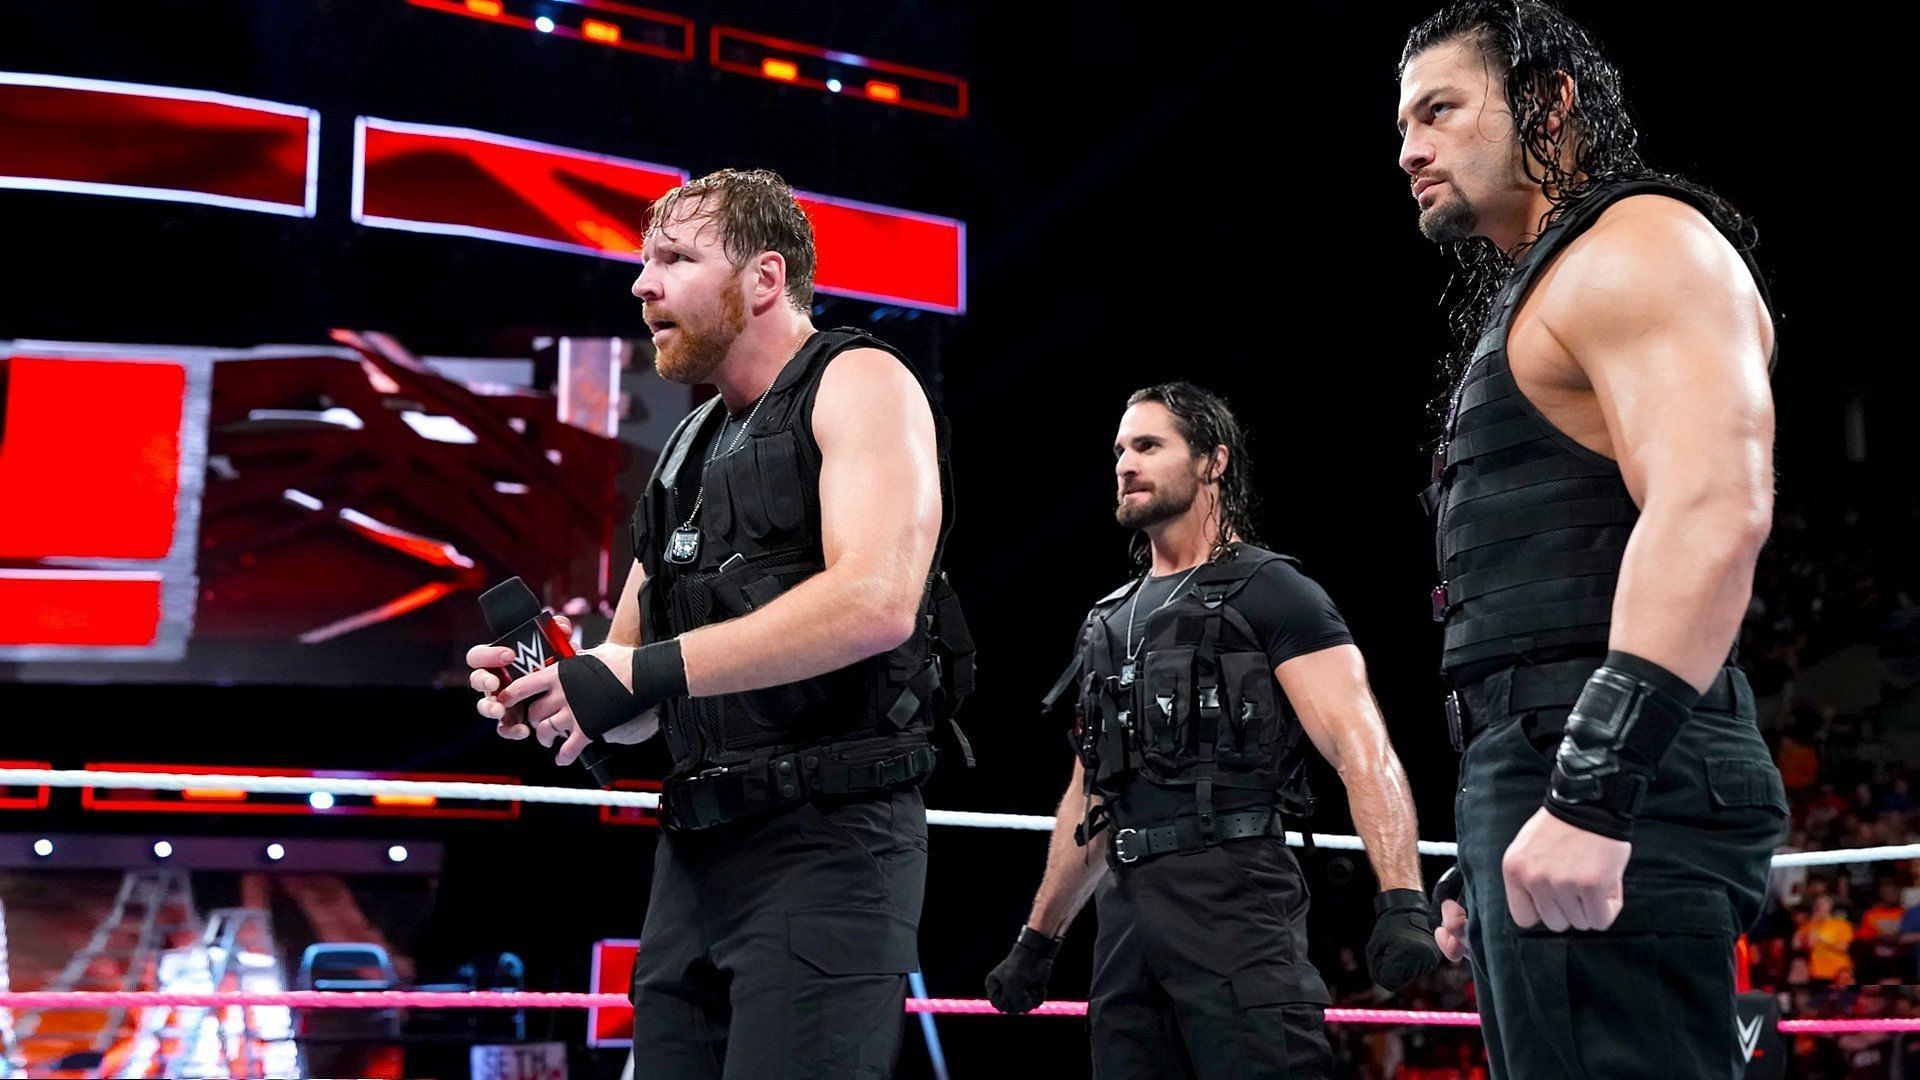 WWE factions like The Shield are always temporary